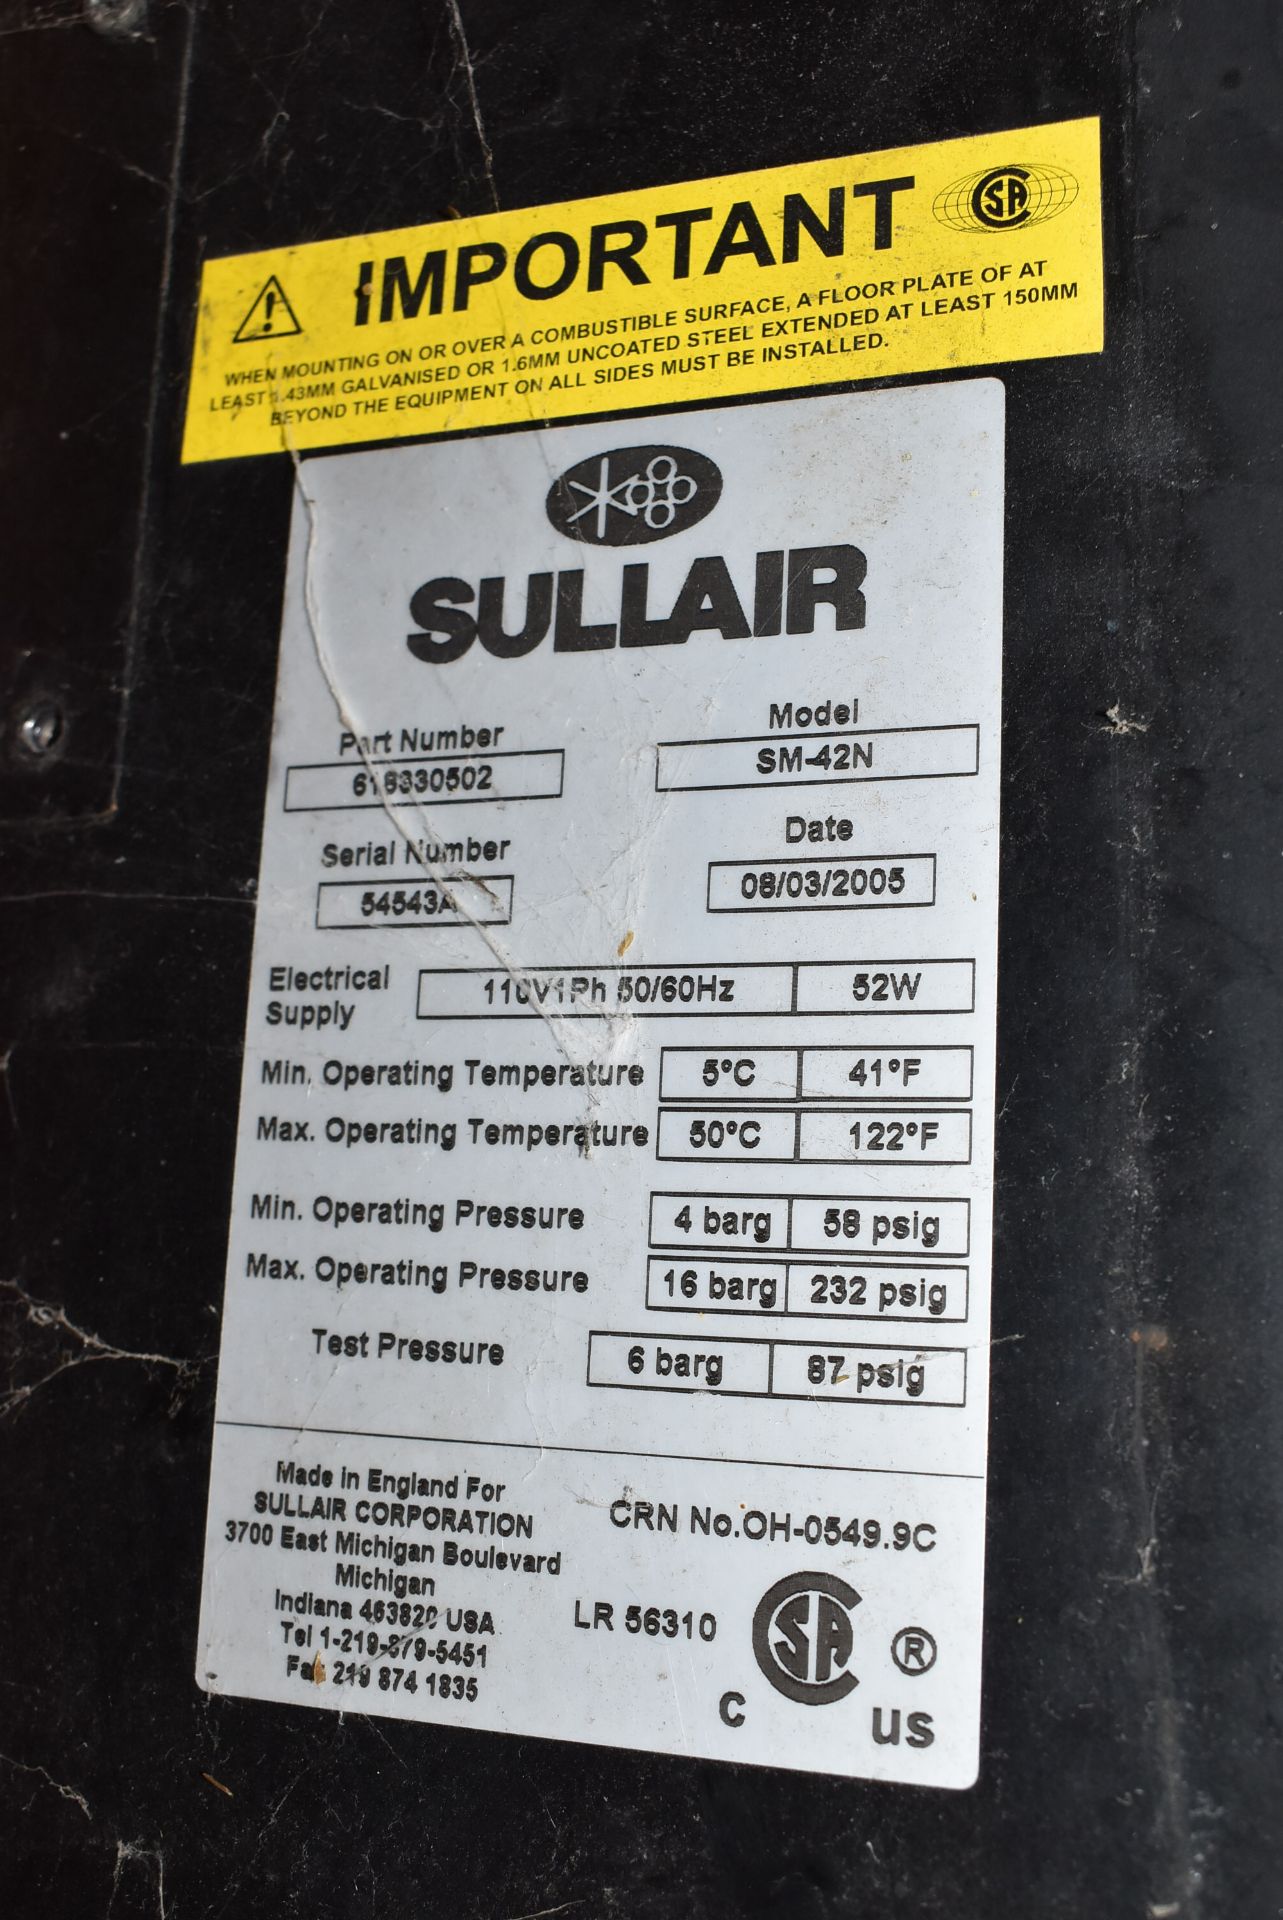 LOT/ GREAT LAKES AIR DRYER AND SULLAIR SM-42N AIR DRYER S/N N/A - Image 5 of 5